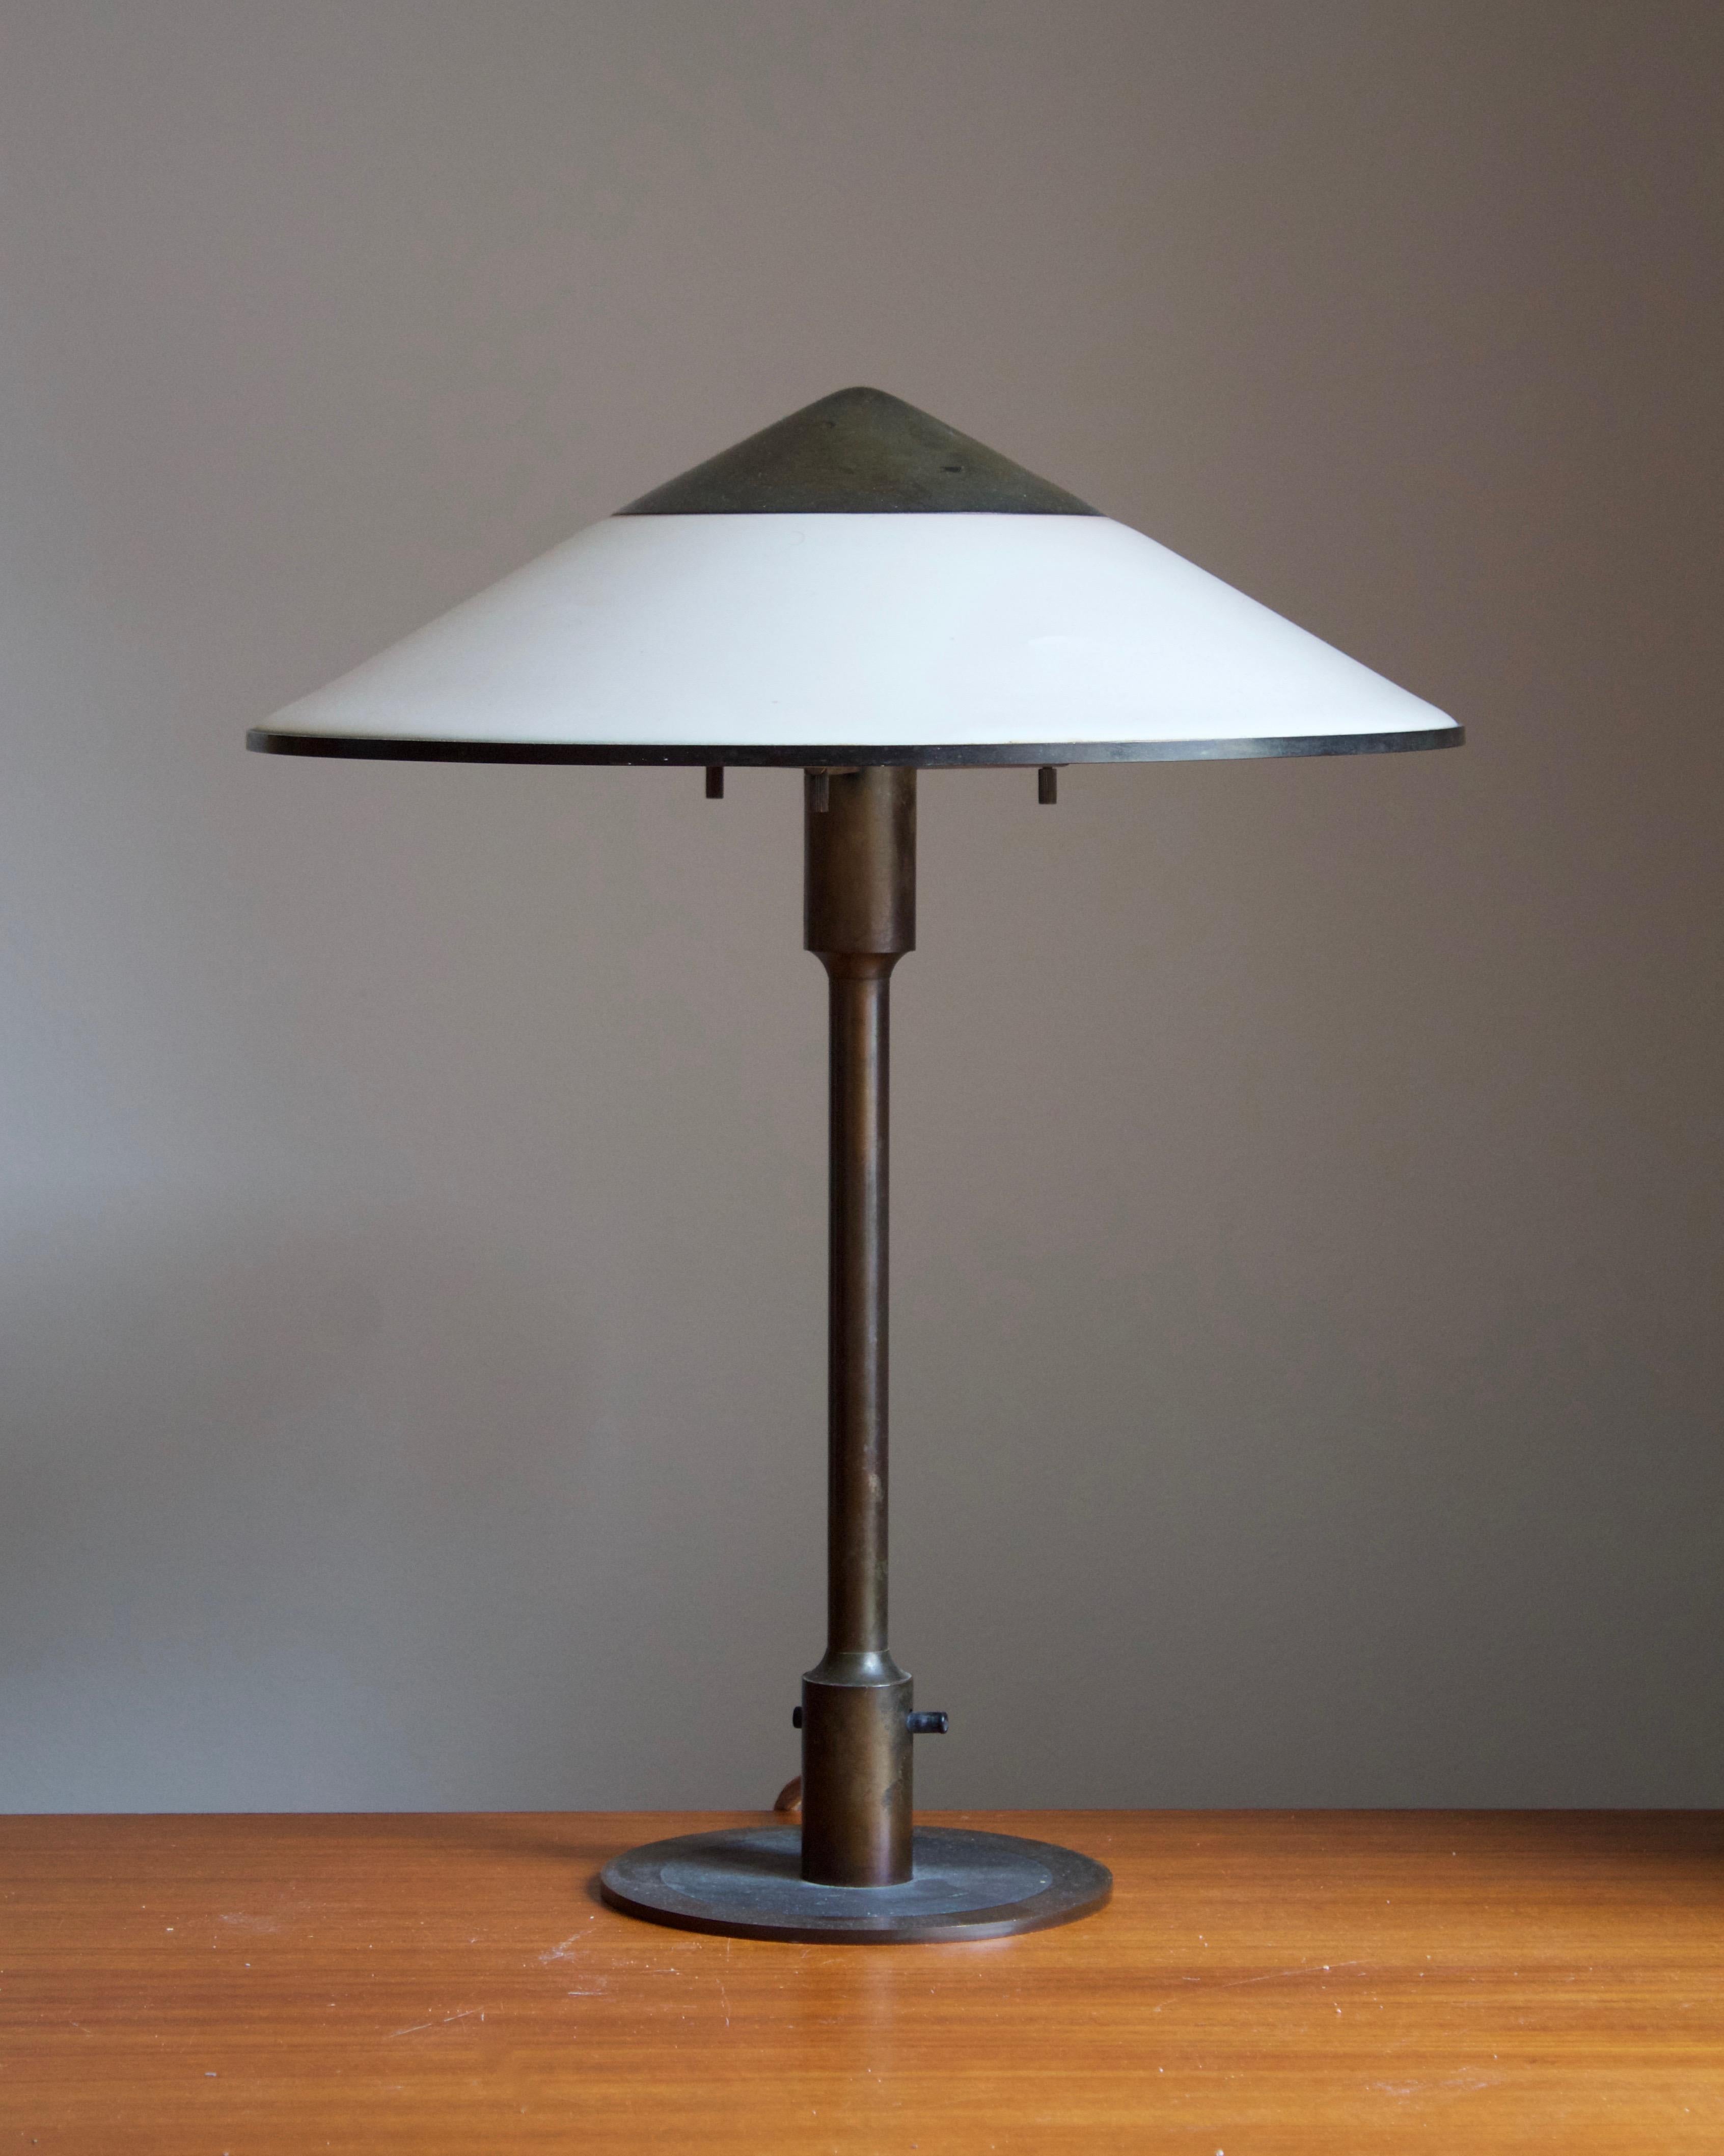 A rare and early table lamp / desk light. Designed by Niels Rasmussen Thykier for Fog & Mørup, Denmark, 1930s. Features a break-through switch typical to early production examples.

In patinated brass and waxed paper screen.

